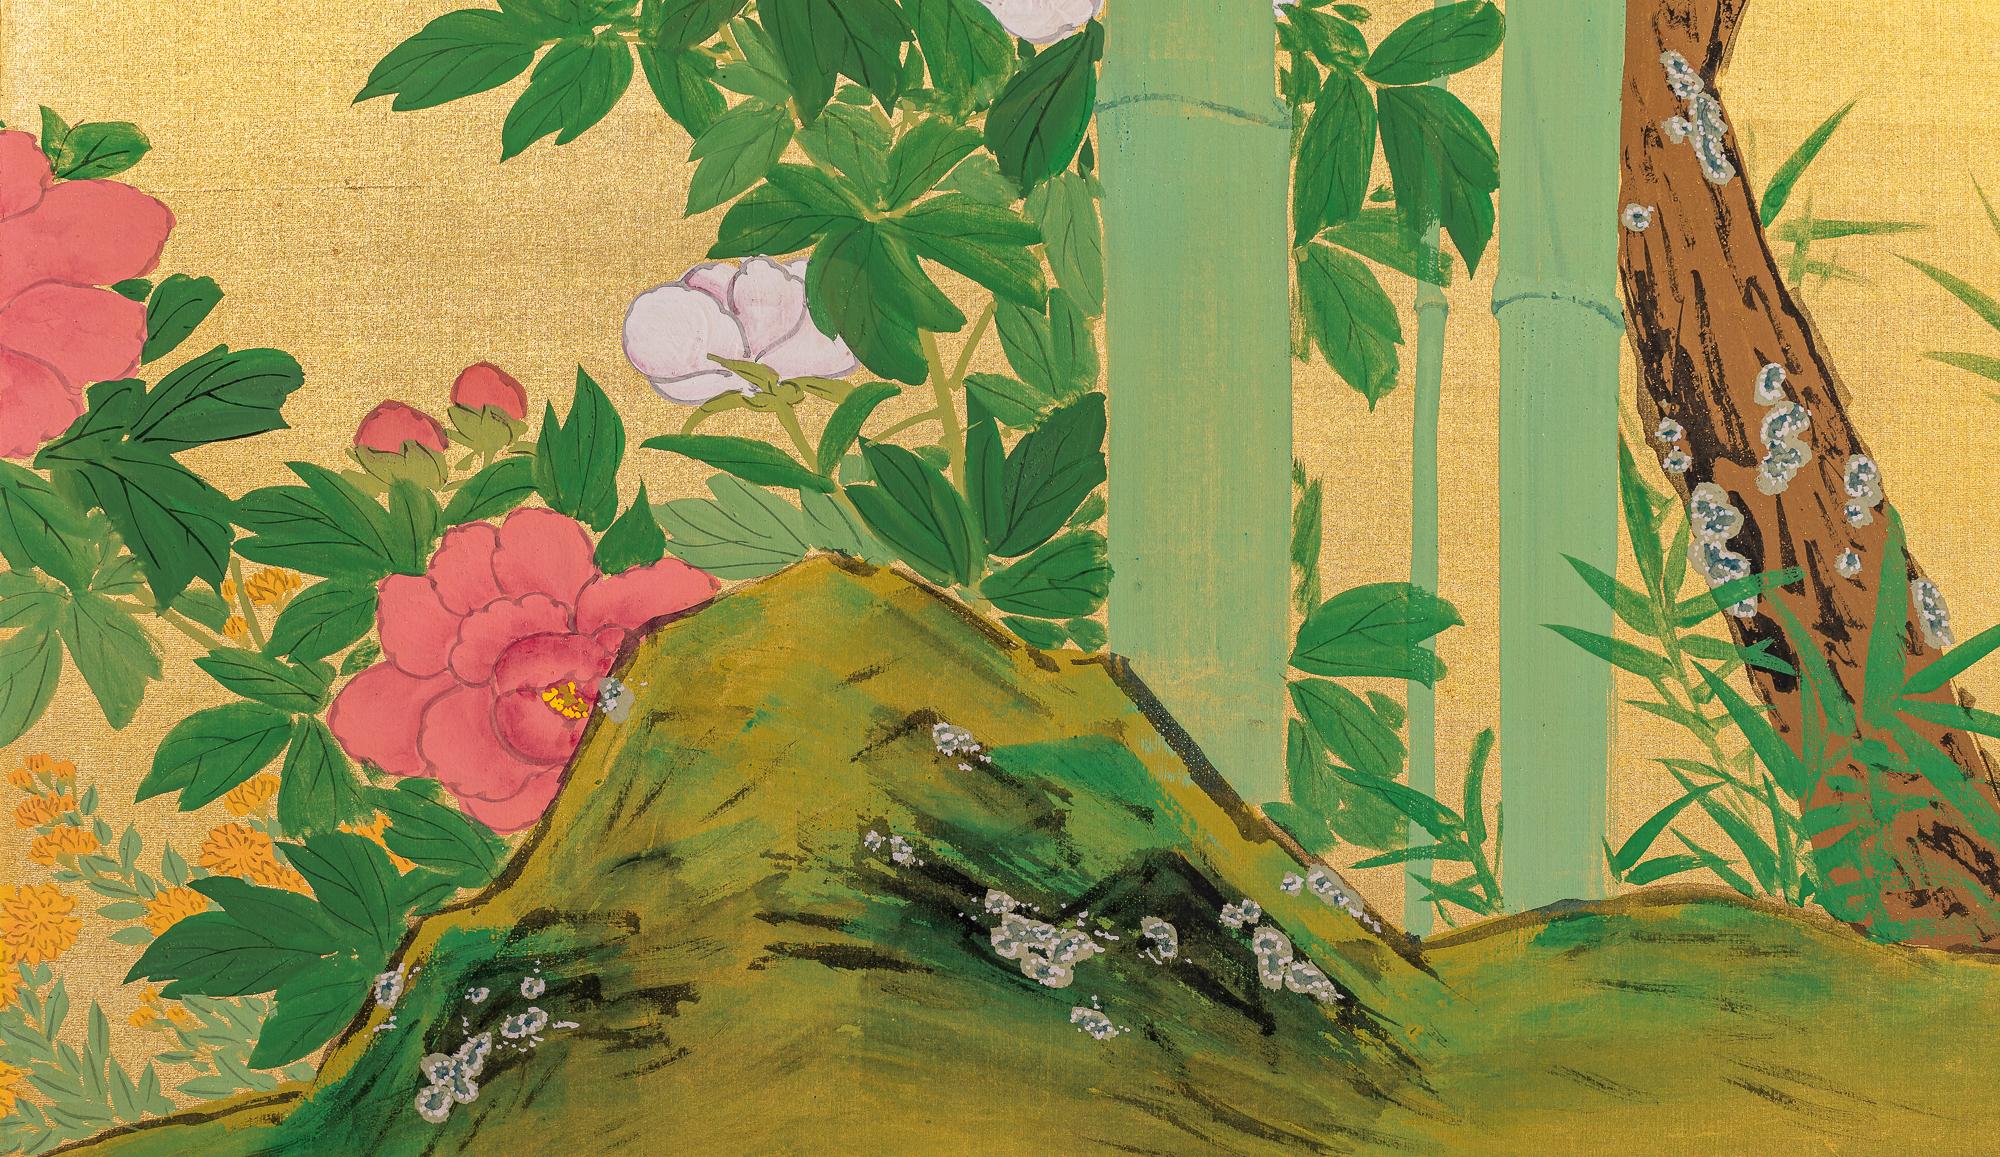 Screen depicts Summer flowers and birds on gilded silk.  Signature reads: Konishi Fukunen.                 Notes about Artist:  Konishi Fukunen (1887-1959) was born the second son of the Paper mounting specialist Konishi Uhei in Takeo, Fukui